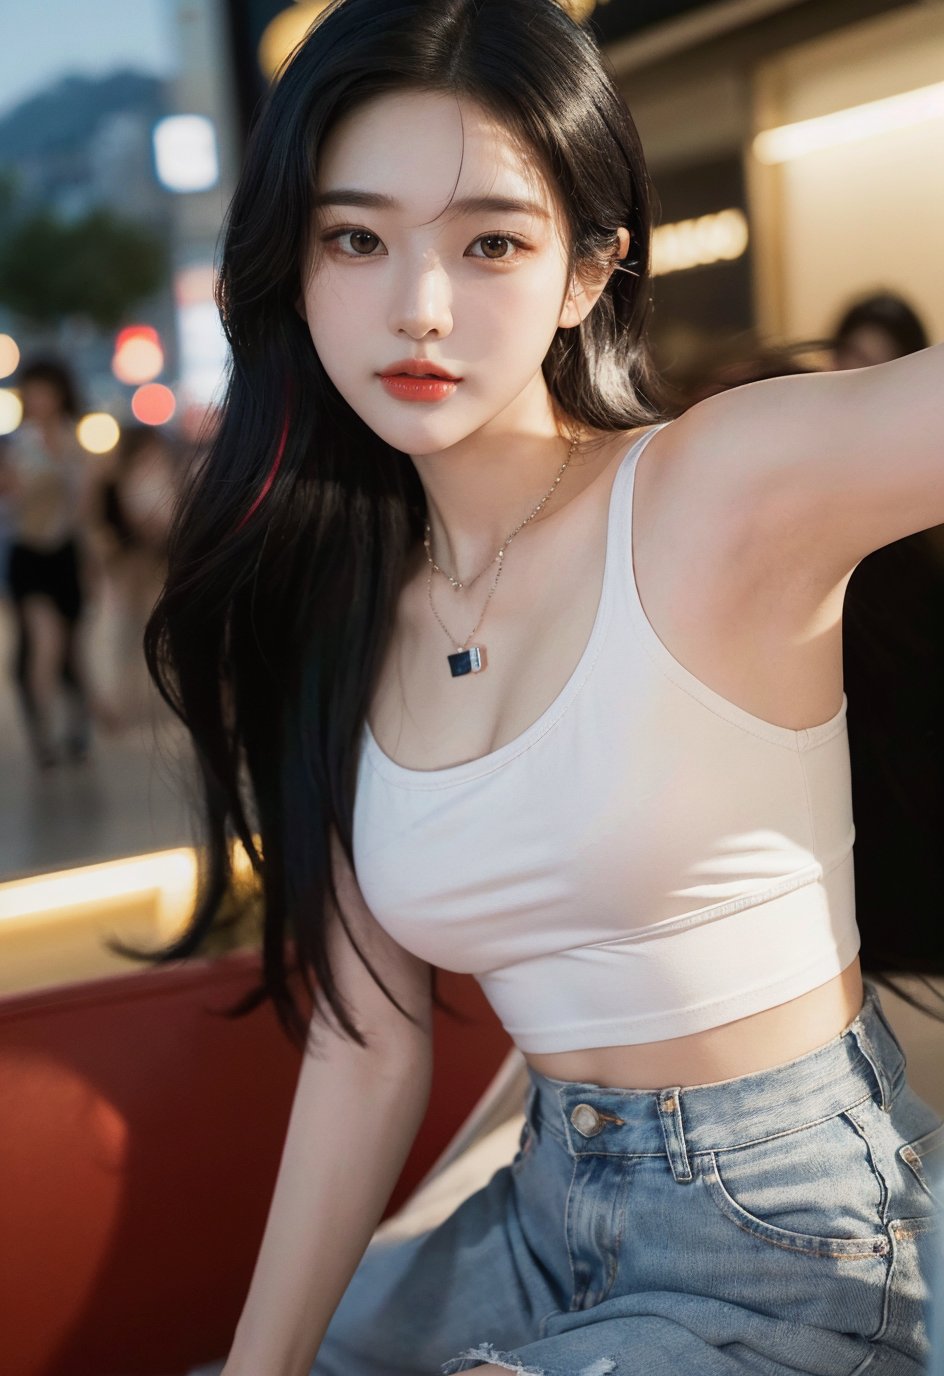 SoHwa, 1 girl, detailed face, a woman with long black hair and a vivid clothing, (((Nsfw))), (night light), led lighting, magnificent light, ((dynamic lightig)), portrait, RAW, (intricate details:1.3), (best quality:1.3), (masterpiece:1.3), (hyper realistic:1.3), best quality, 1girl, ultra-detailed, ultra high resolution, very detailed mphysically based rendering, dynamic angle, dynamic pose, wind, 8K UHD, Vivid picture, High definition, intricate details, detailed texture, finely detailed, high detail, extremely detailed cg, High quality shadow, a realistic representation of the face, beautiful detailed, (high detailed skin, skin details), slim waist, beautiful and realistic and detailed hands and fingers:1, best ratio four finger and one thumb, (detailed face, detailed eyes, beautiful face), ((korean beauty, kpop idol, ulzzang, korean celebrity, korean cute, korean actress, korean, a beautiful 18 years old beautiful korean girl)), (high detailed skin, skin details), Detailed beautiful delicate face, Detailed beautiful delicate eyes, a face of perfect proportion, (beautiful and realistic and detailed hands and fingers:1.3), (Big breasts:1.3), (full body shot:1.3), (long legs:1.3), (sparkling eyes:1.3), (sparkling lips:1.3), taken by Canon EOS, SIGMA Art Lens 35mm F1.4, ISO 200 Shutter Speed 2000, Vivid ((korean beauty, kpop idol, ulzzang, korean celebrity, korean cute, korean actress, korean, 인스타 여신:1.3)), (blue eye), (black long hair),chanel_jewelry, chanel_bag, van cleef_necklace,Nice legs and hot body, see-through,hourglass bodyshape, SoHwa, (smile), (1girl), (teengirl), (32k), (raw photo, Detailed CG Illustration), (masterpiece), (best quality), (highres), (background), (ultra detailed), (physically-based rendering), (realistic), (photo-realistic), (cinematic light:1.4), (Clean facial skin: 1.2), (Glowing skin), ( intricate details), (hyper detail), (cowboy shot), (cinematic light), (rim lighting), (casual:1.4), (korean idol:1.2), (korean cute girl:1.2), (finely detailed eyes and detailed face), (small_face), (egg-shaped_face), (Big Smile), (multicolored_hair), (Big breasts), (absurdly_long_hair), (Eyelashes), (long_eyes), (long_eyelashes), (long_eyebrow), (black_eyes), (Parted_lips), (red_lips), (Slim), (Light Source prepare),  sophisticated, Accessories, jewelry, Denim jacket, white round tee, jeans, major league baseball cap